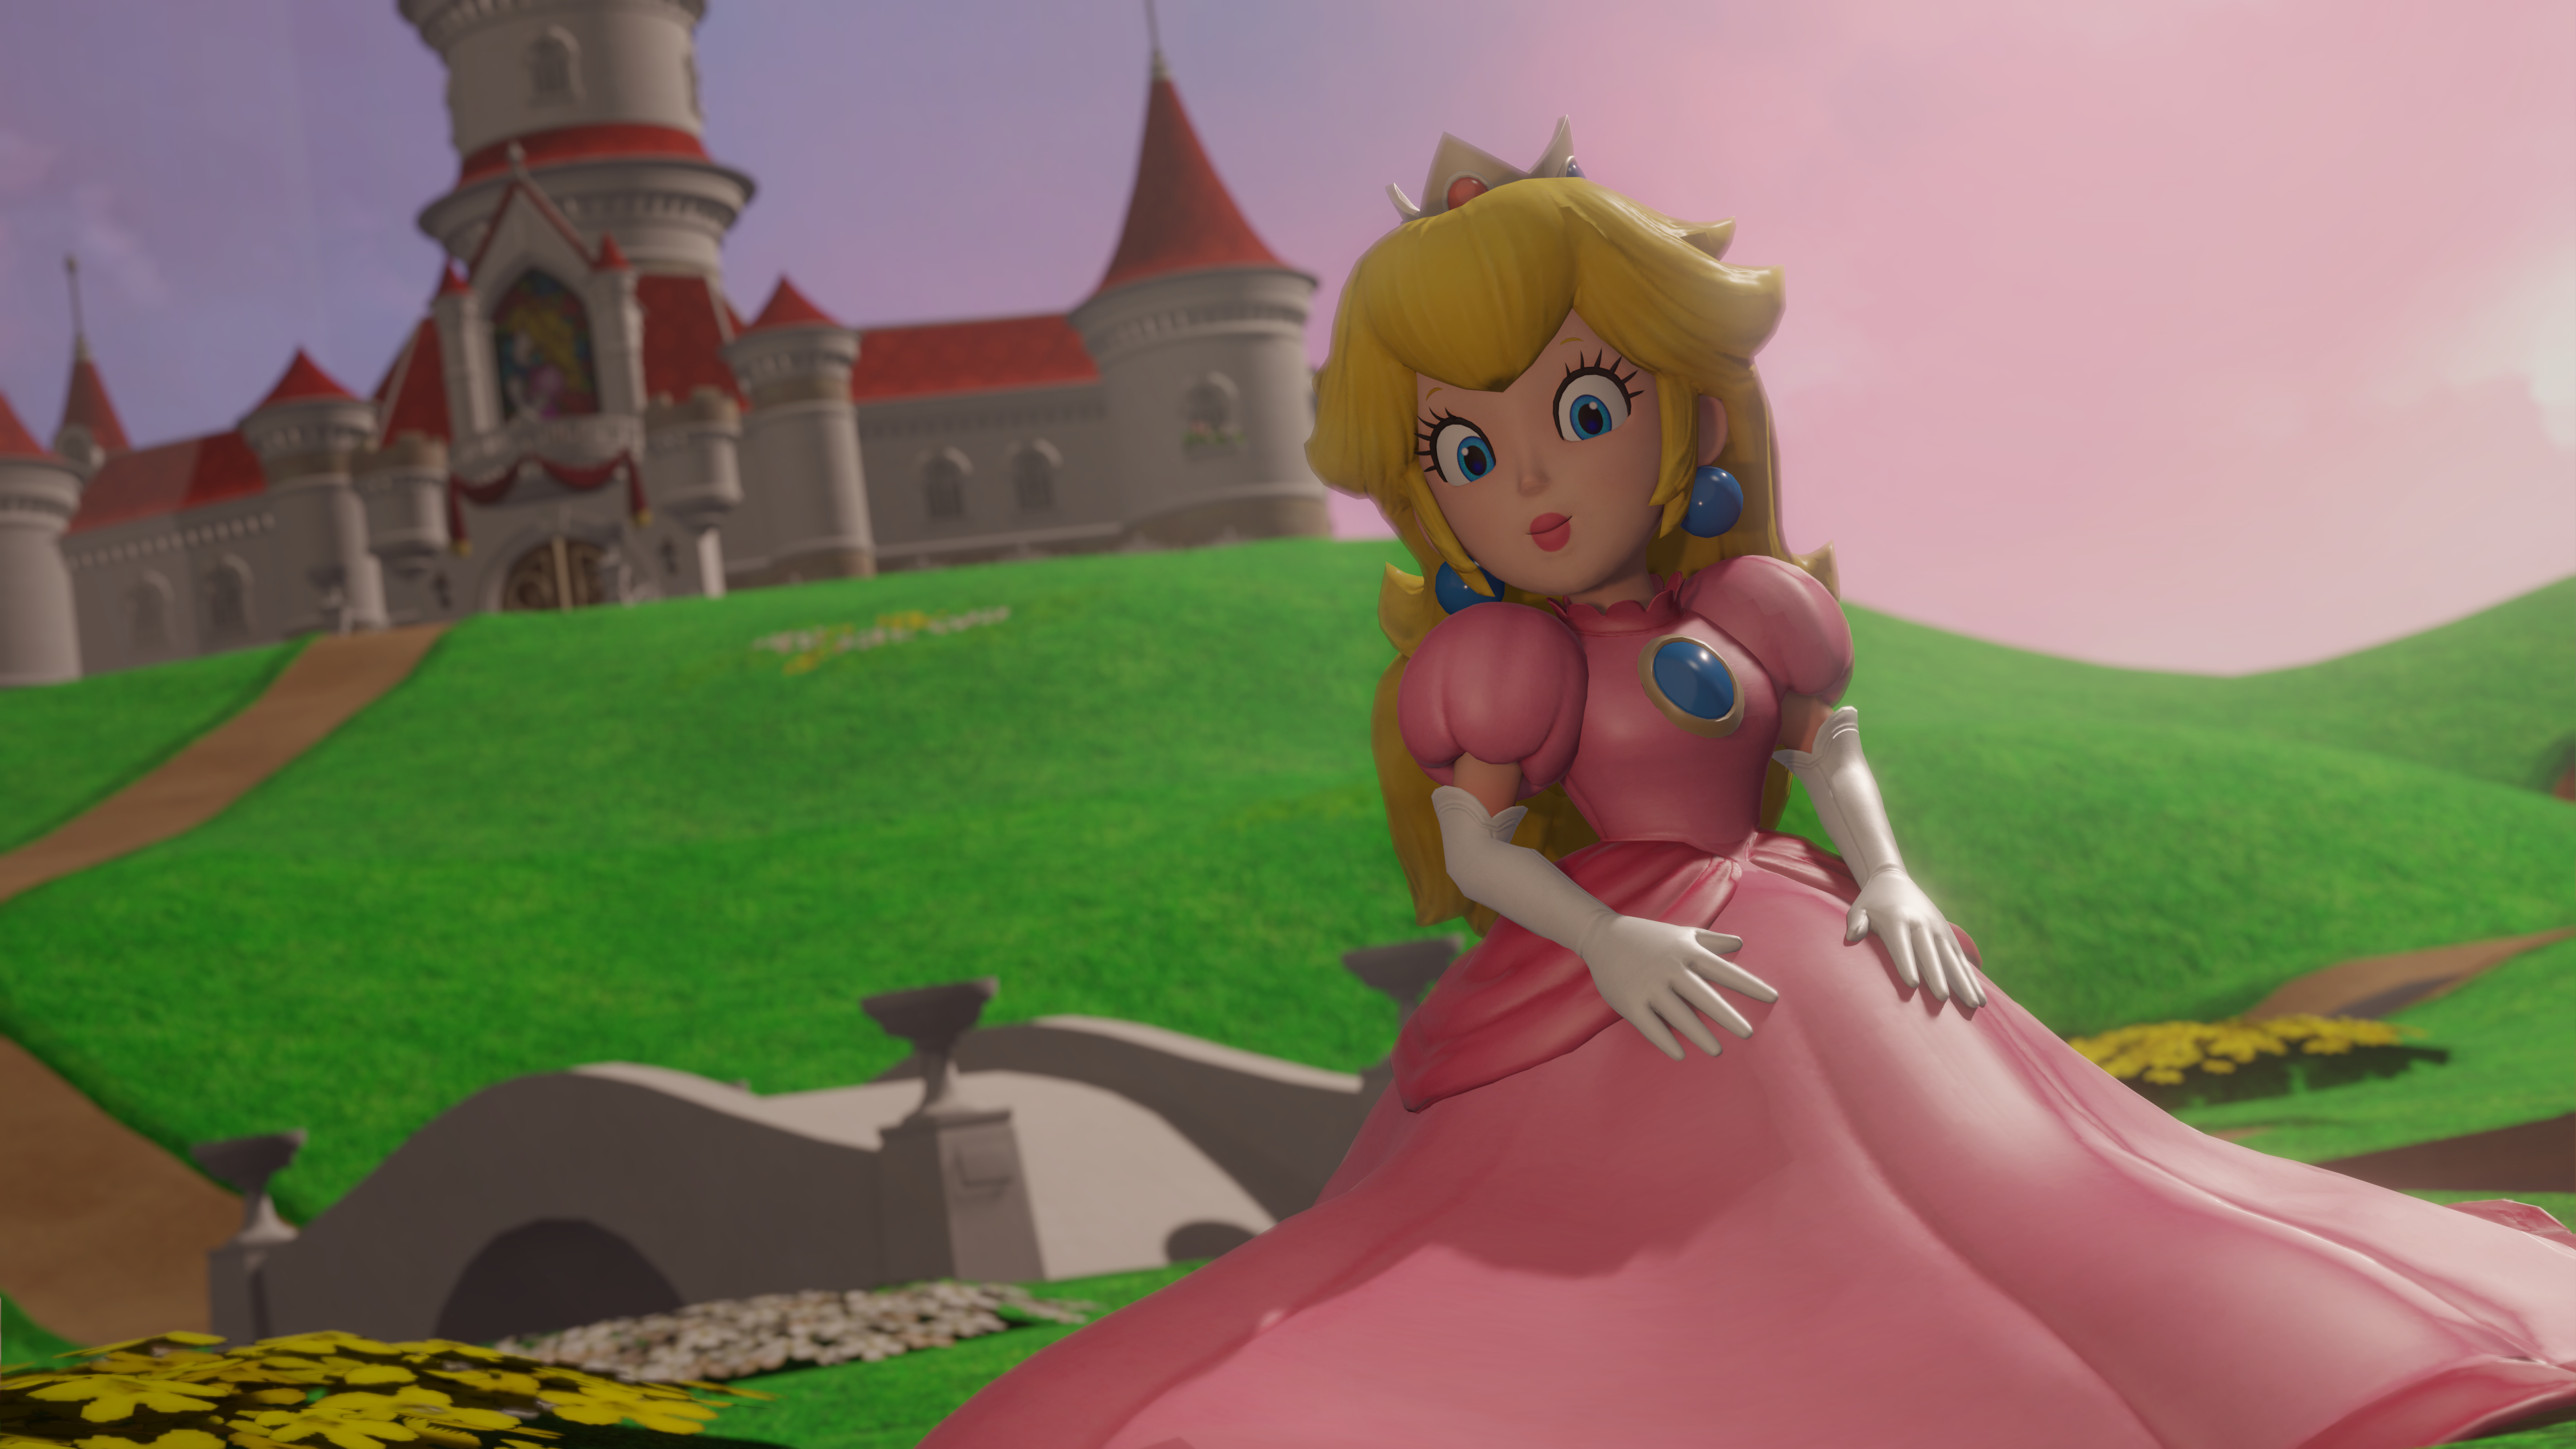 3840x2160 10+ 4K Princess Peach Wallpapers | Background Images